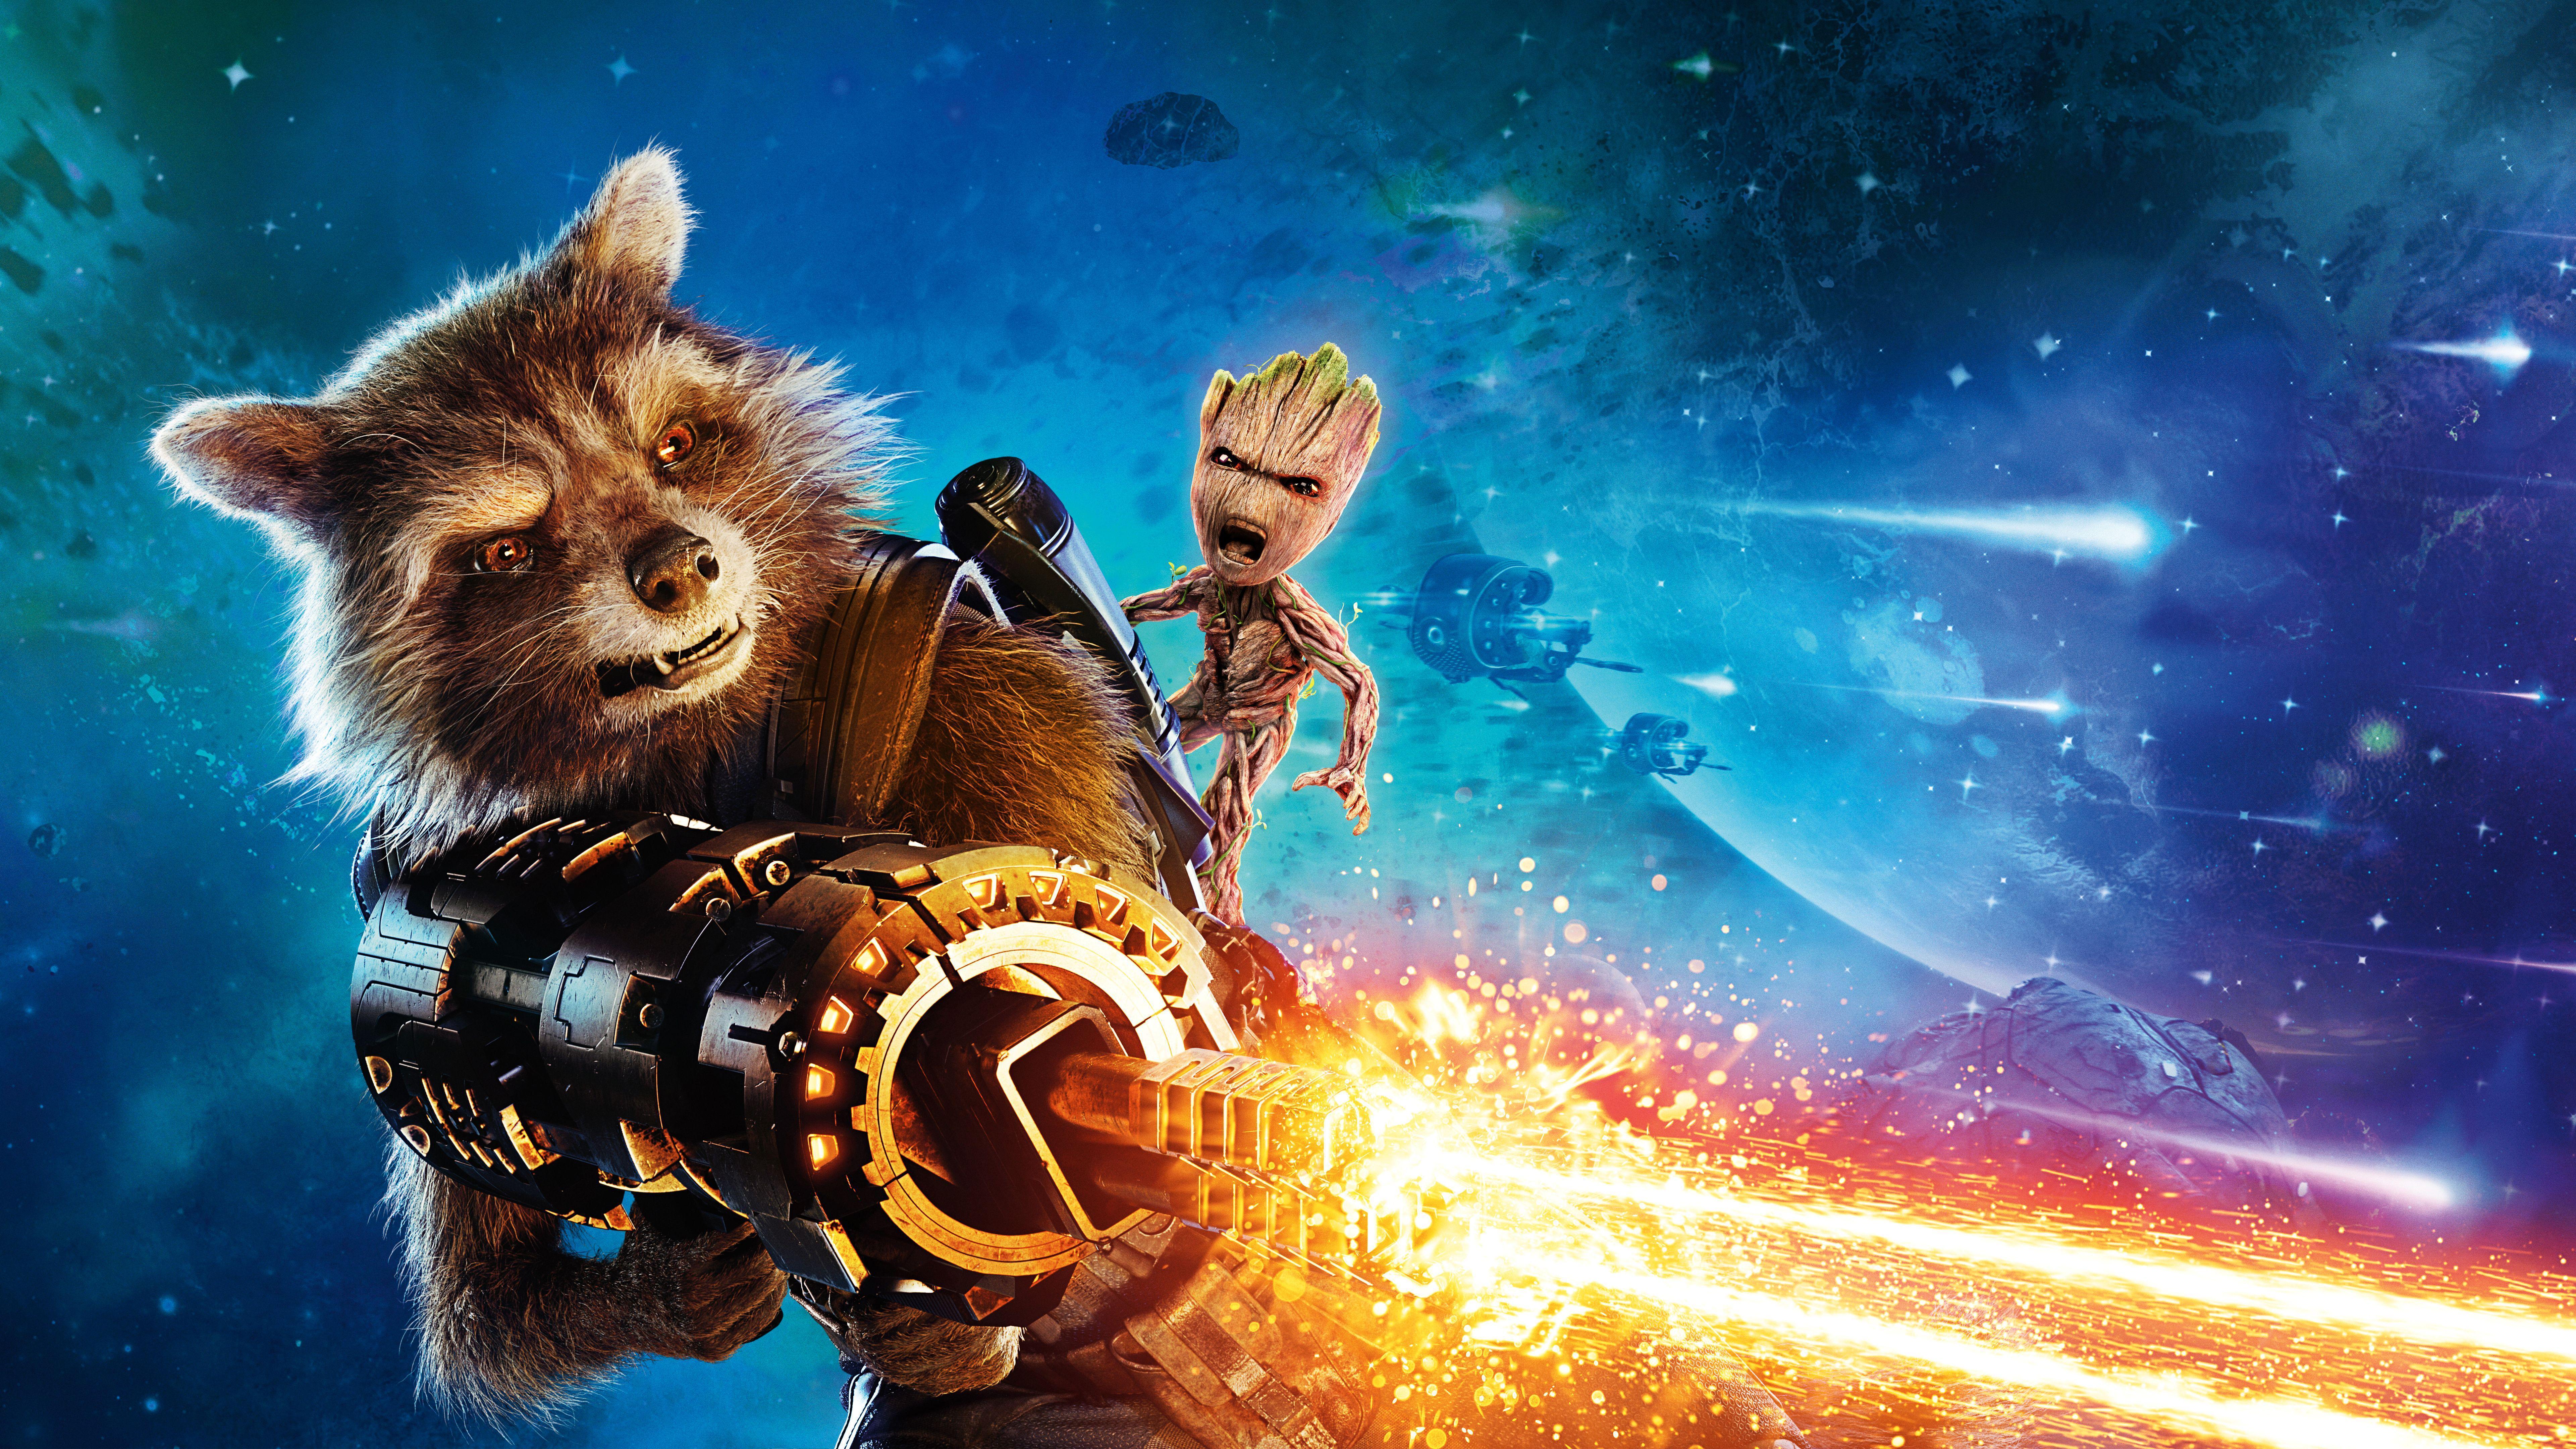 152 Guardians of the Galaxy Vol. 2 HD Wallpapers